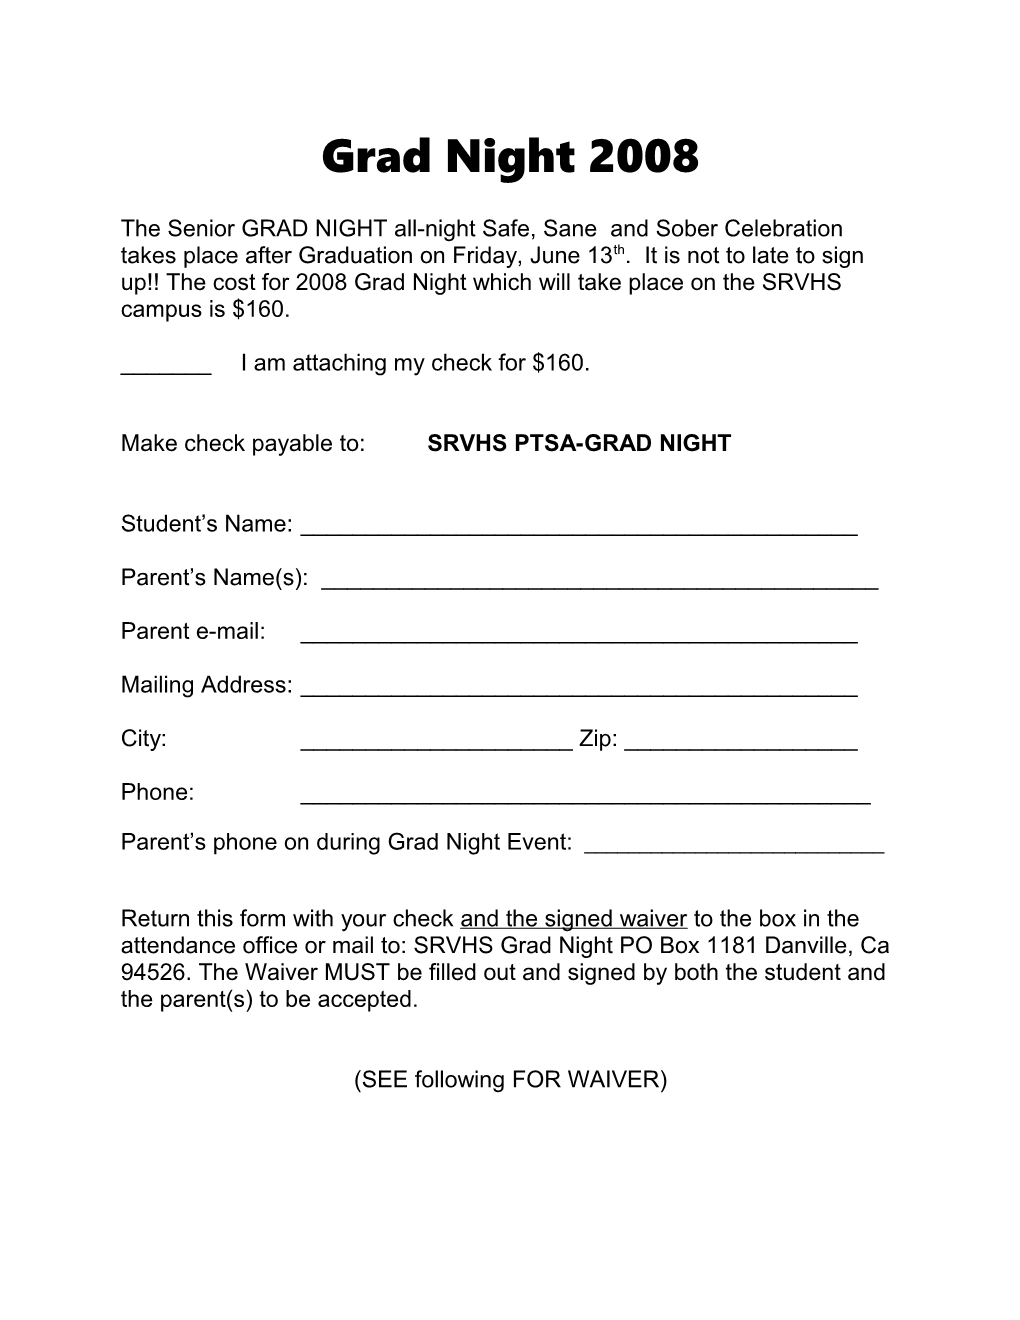 The Senior GRAD NIGHT All-Night Safe, Sane and Sober Celebration Takes Place After Graduation